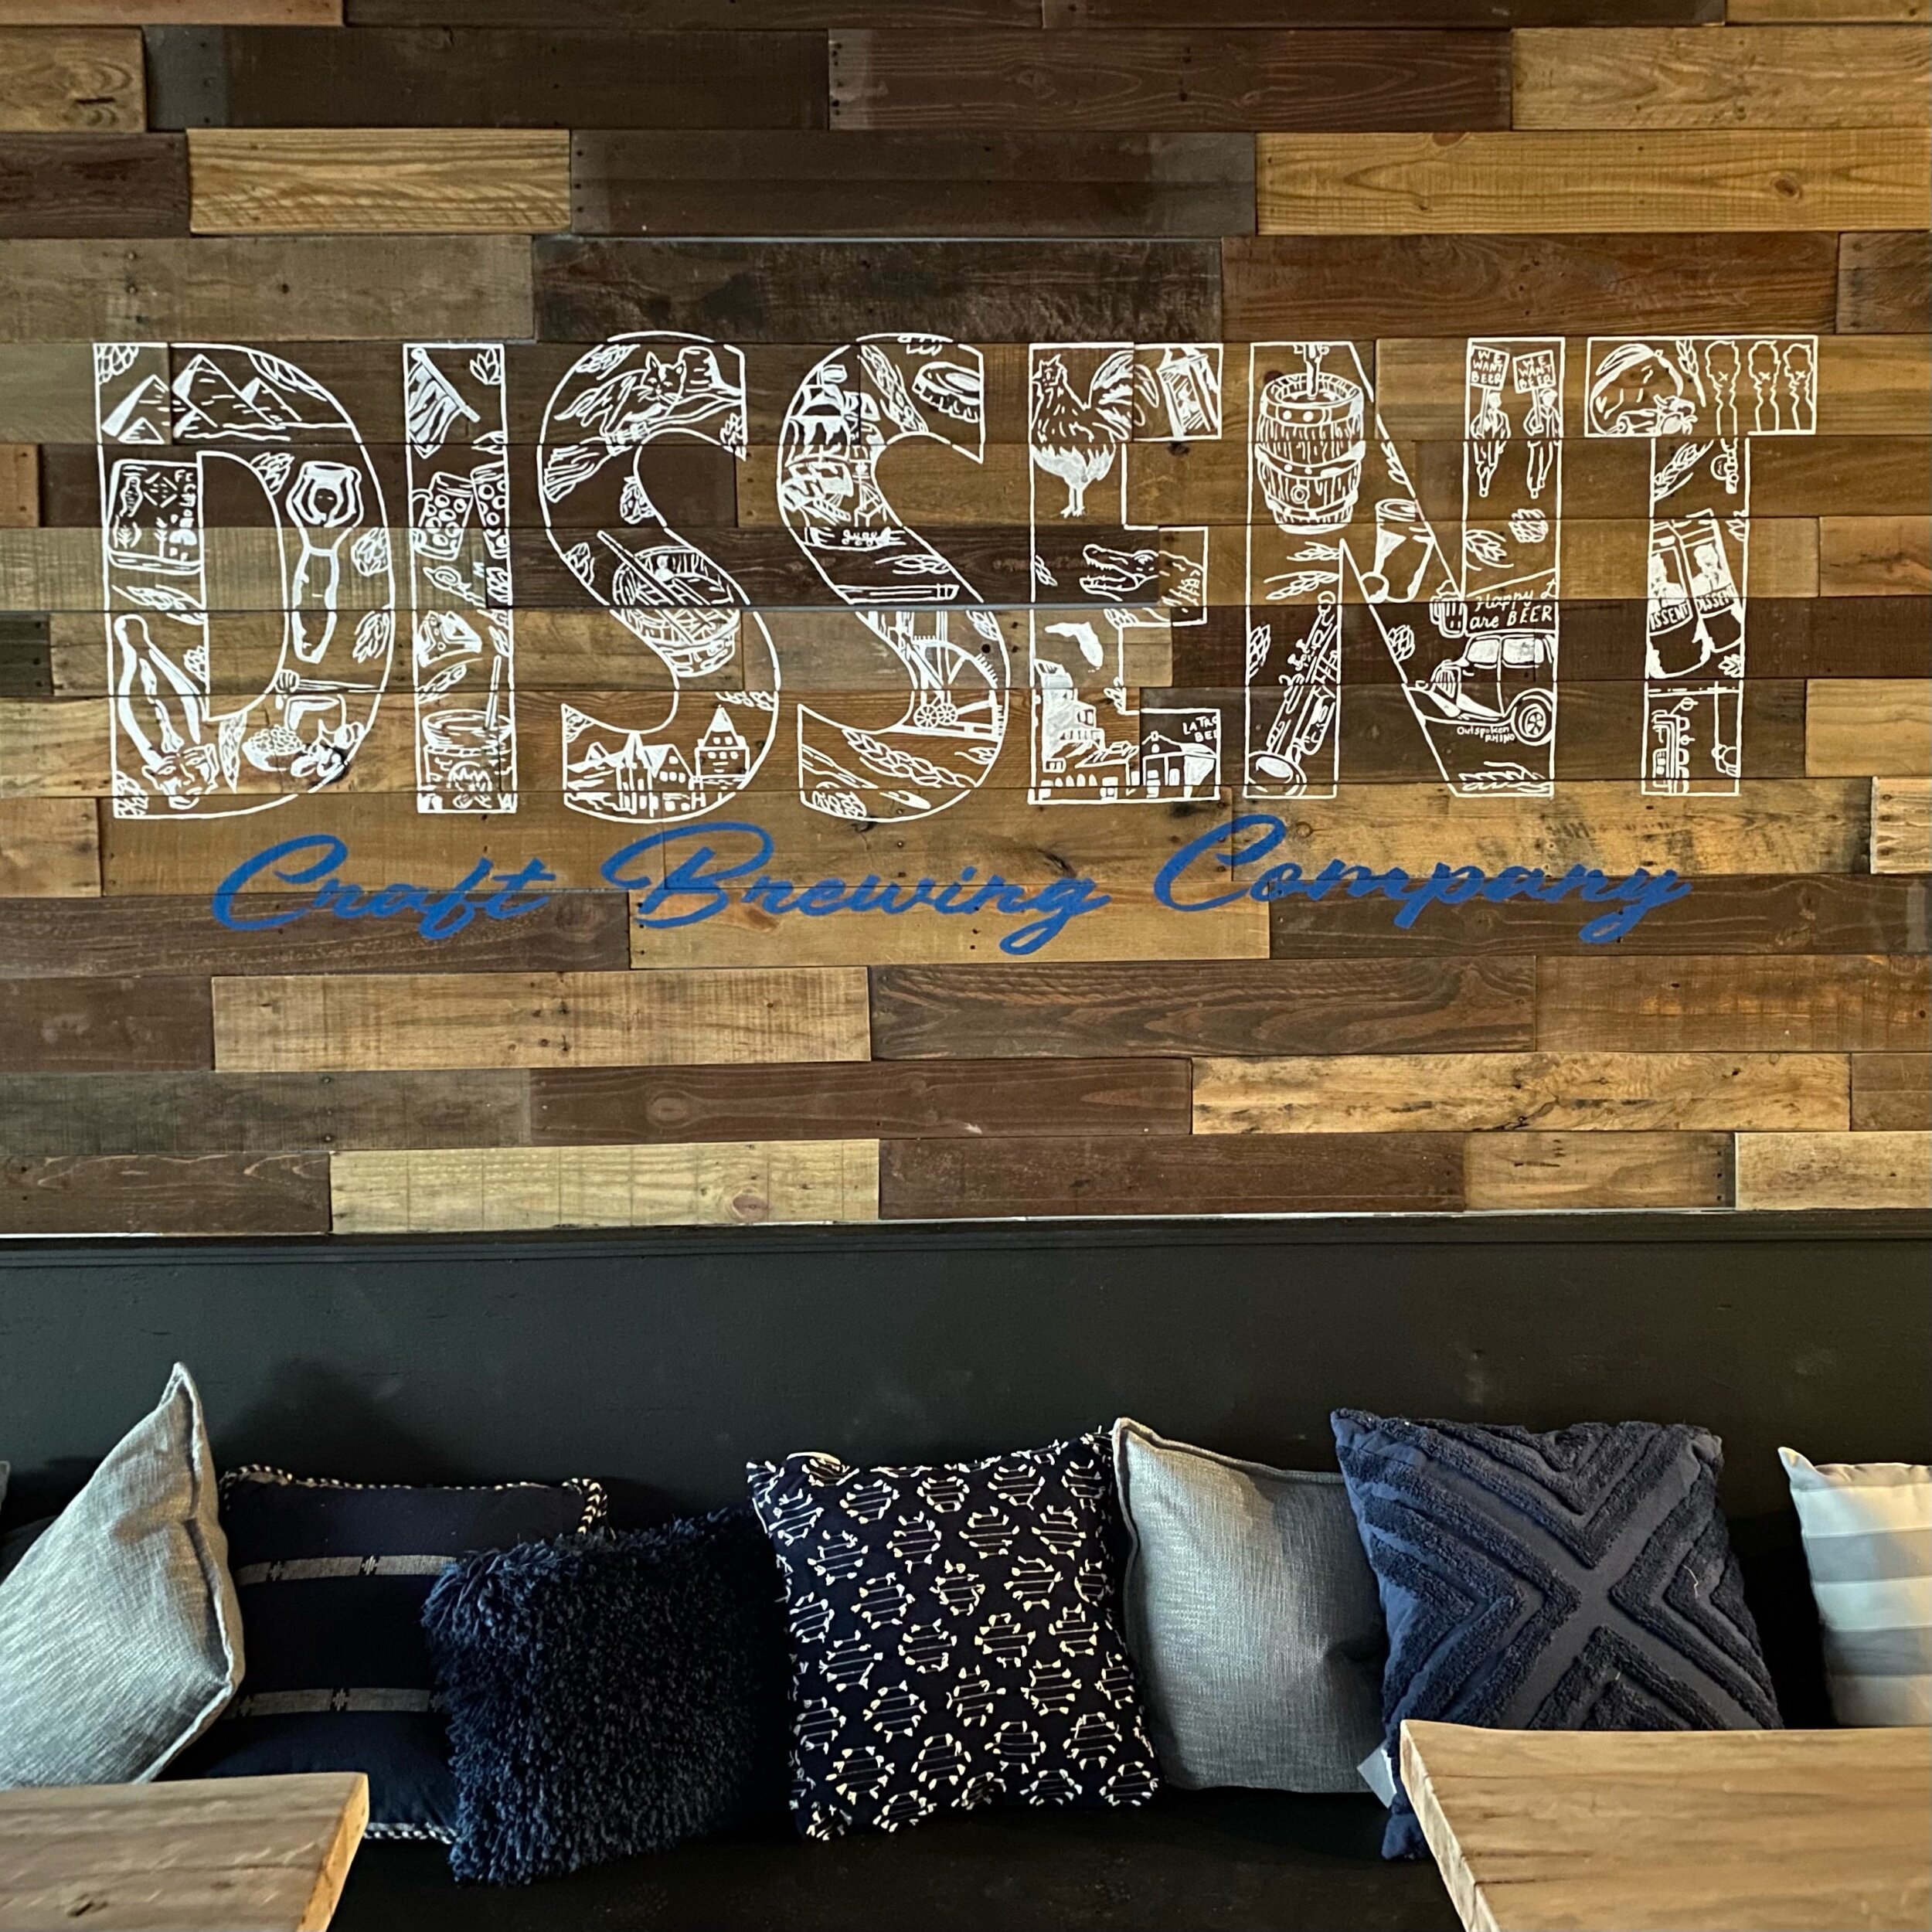 Dissent Craft Brewing Company wood mural